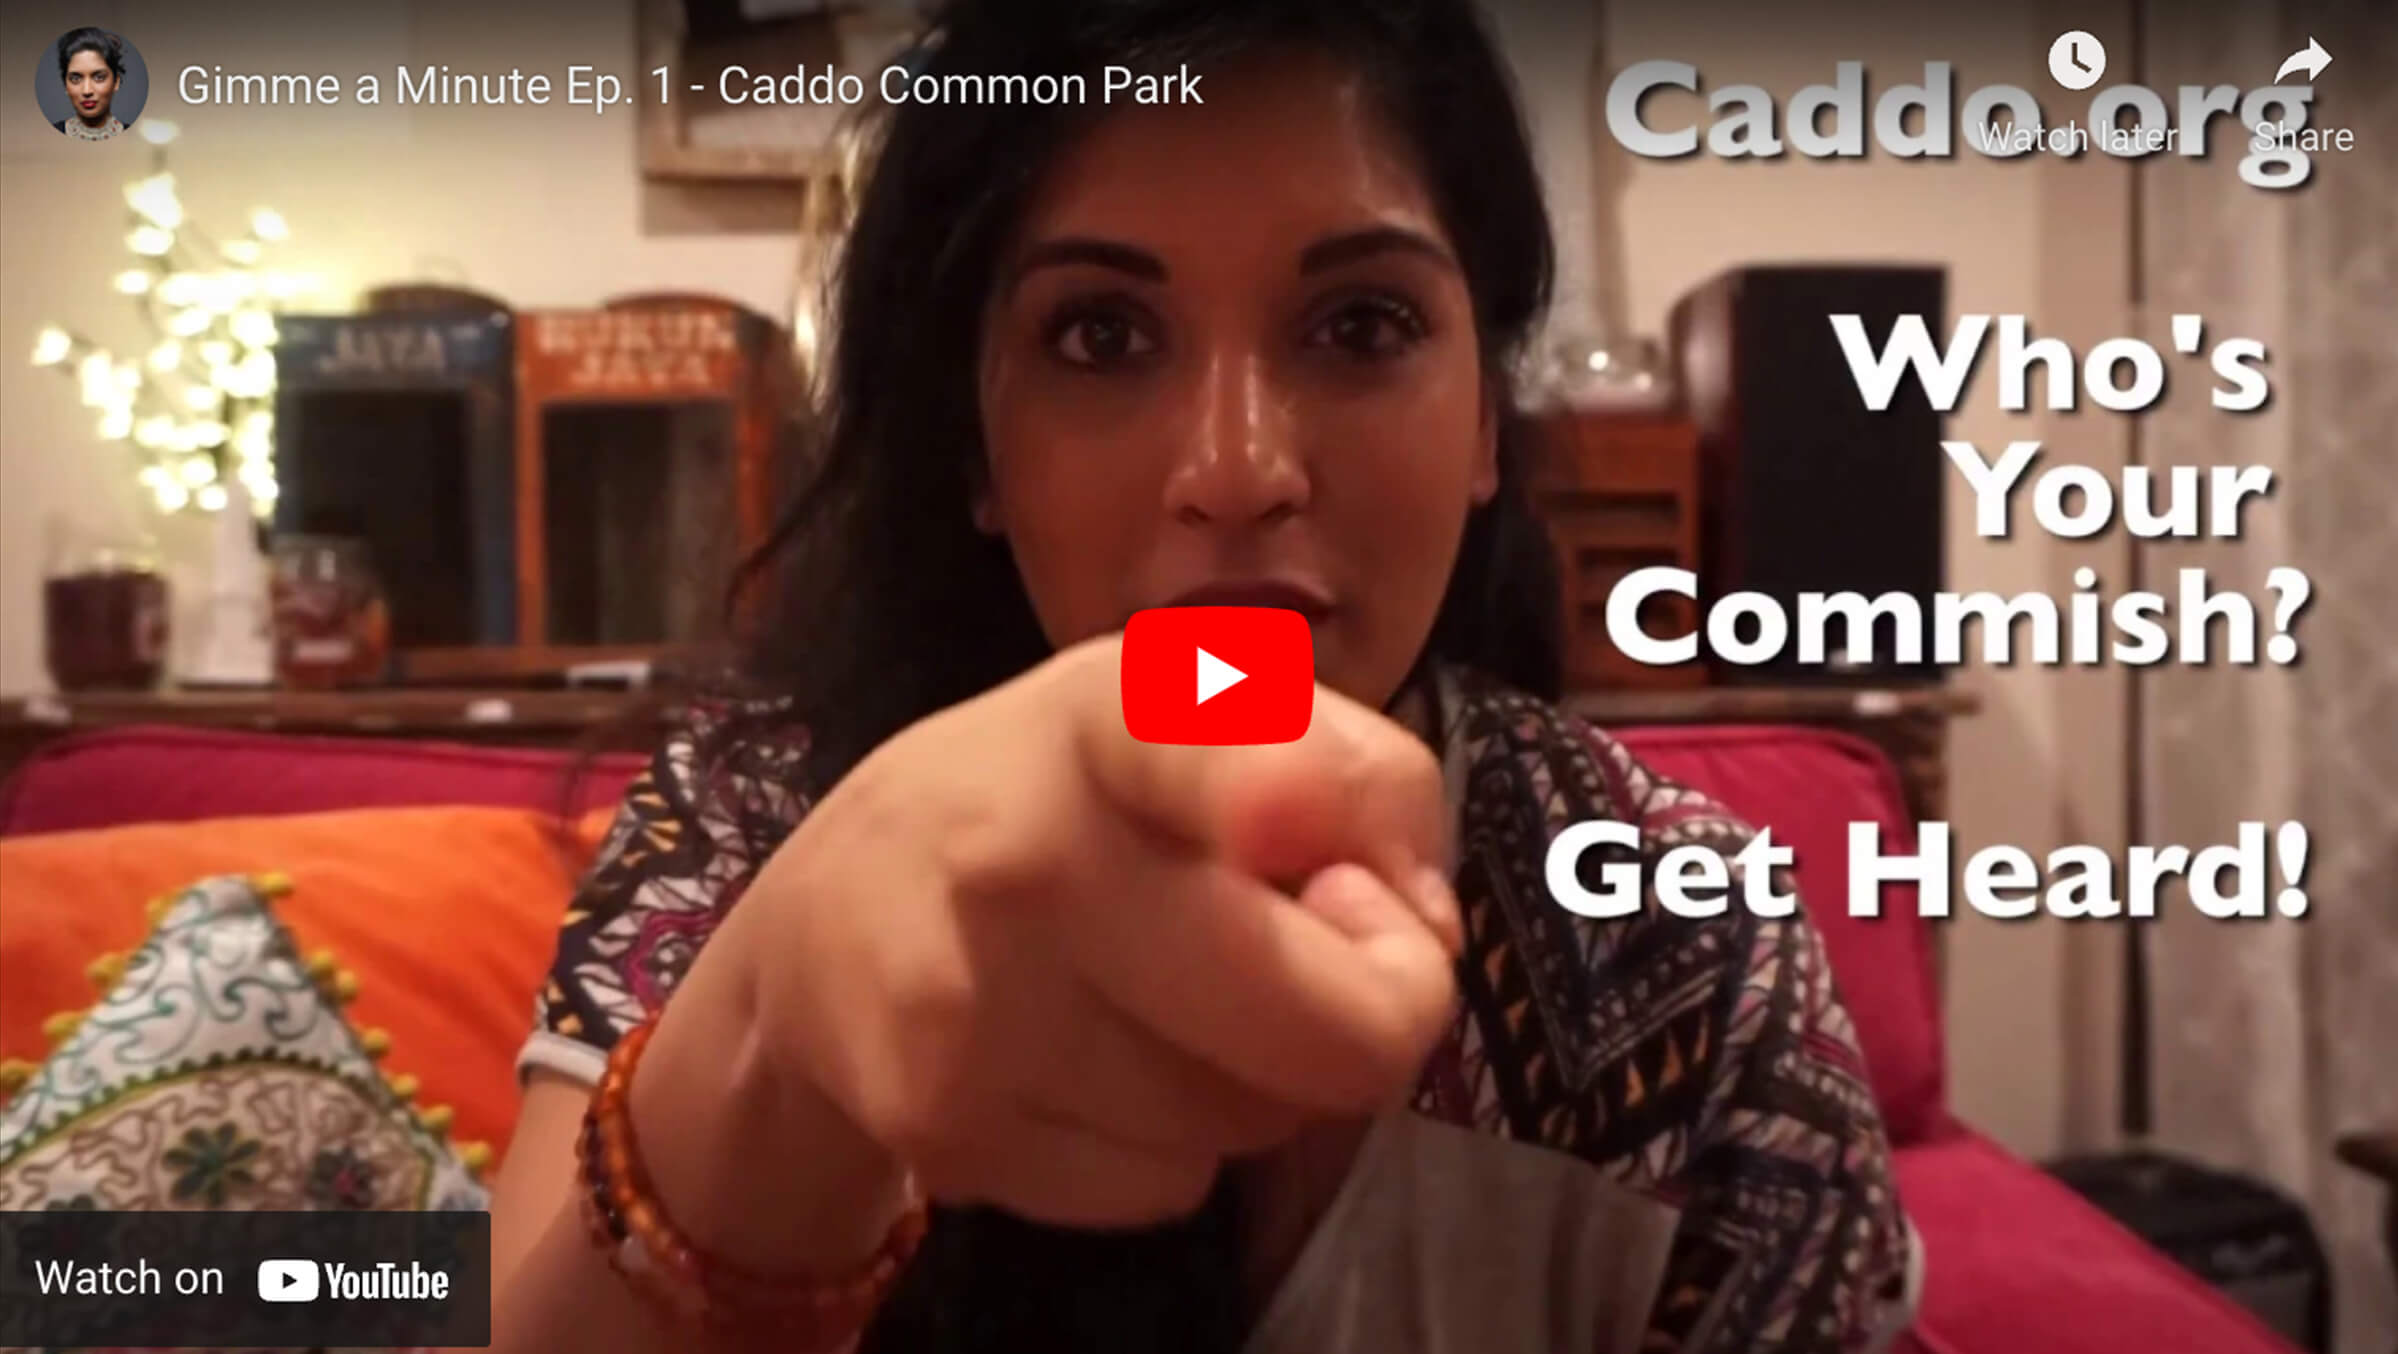 Featured image for “Gimme a Minute Ep. 1 – Caddo Common Park”